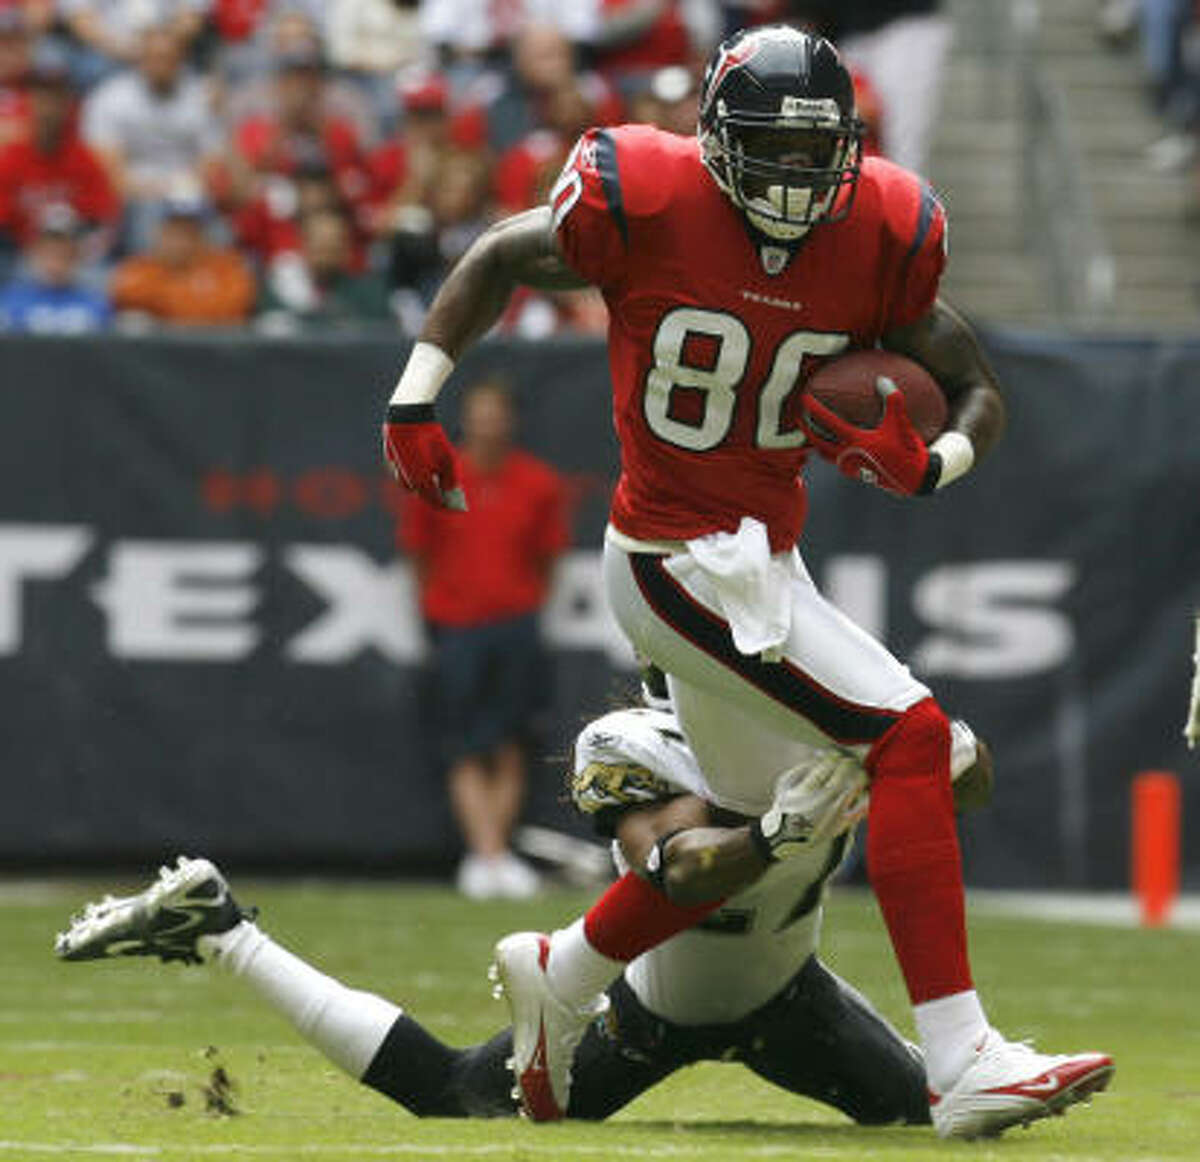 HIT: Andre Johnson Position: Wide receiver Year drafted: 2003 (first round) Comment: A four-time Pro Bowl selection, Johnson has led the NFL in receiving yards the past two seasons.